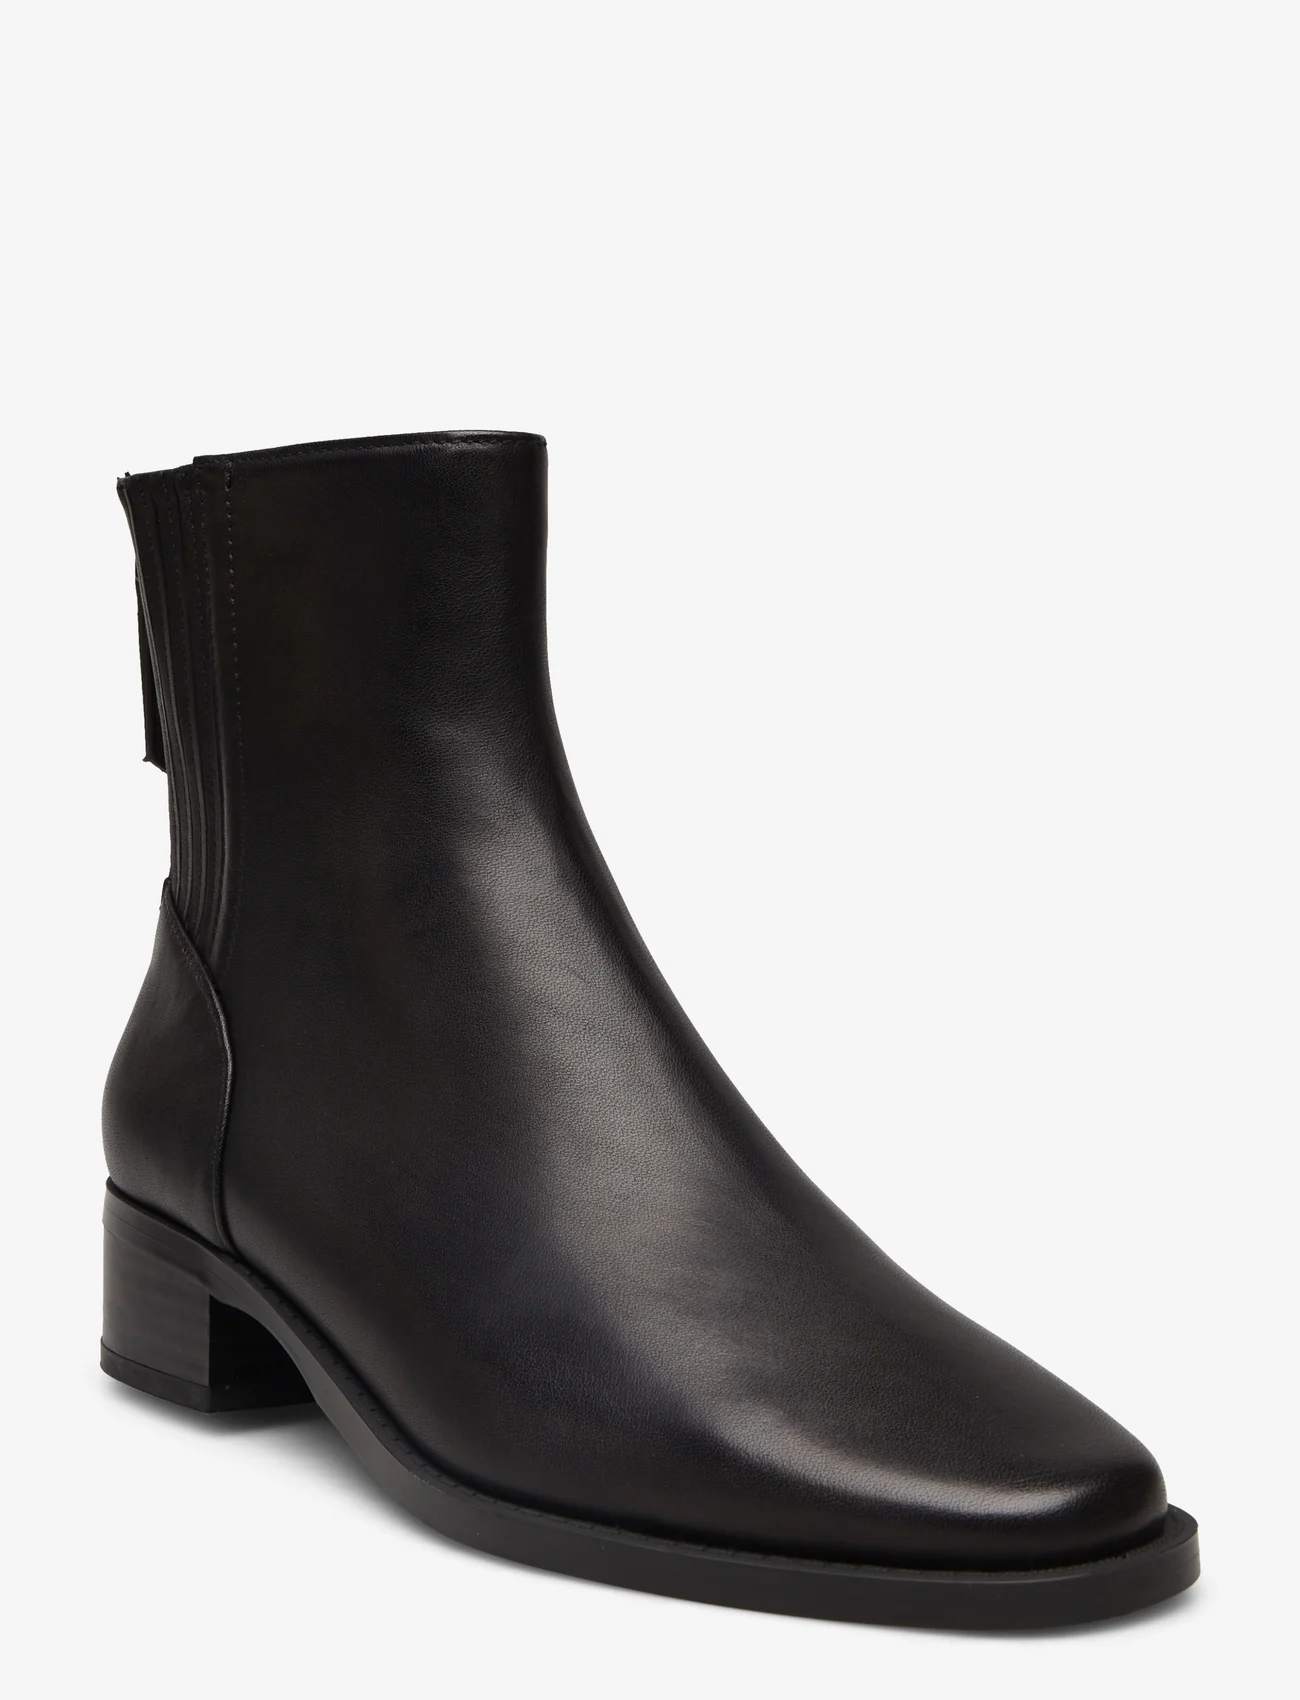 Mango - Leather ankle boots with ankle zip closure - høye hæler - black - 1